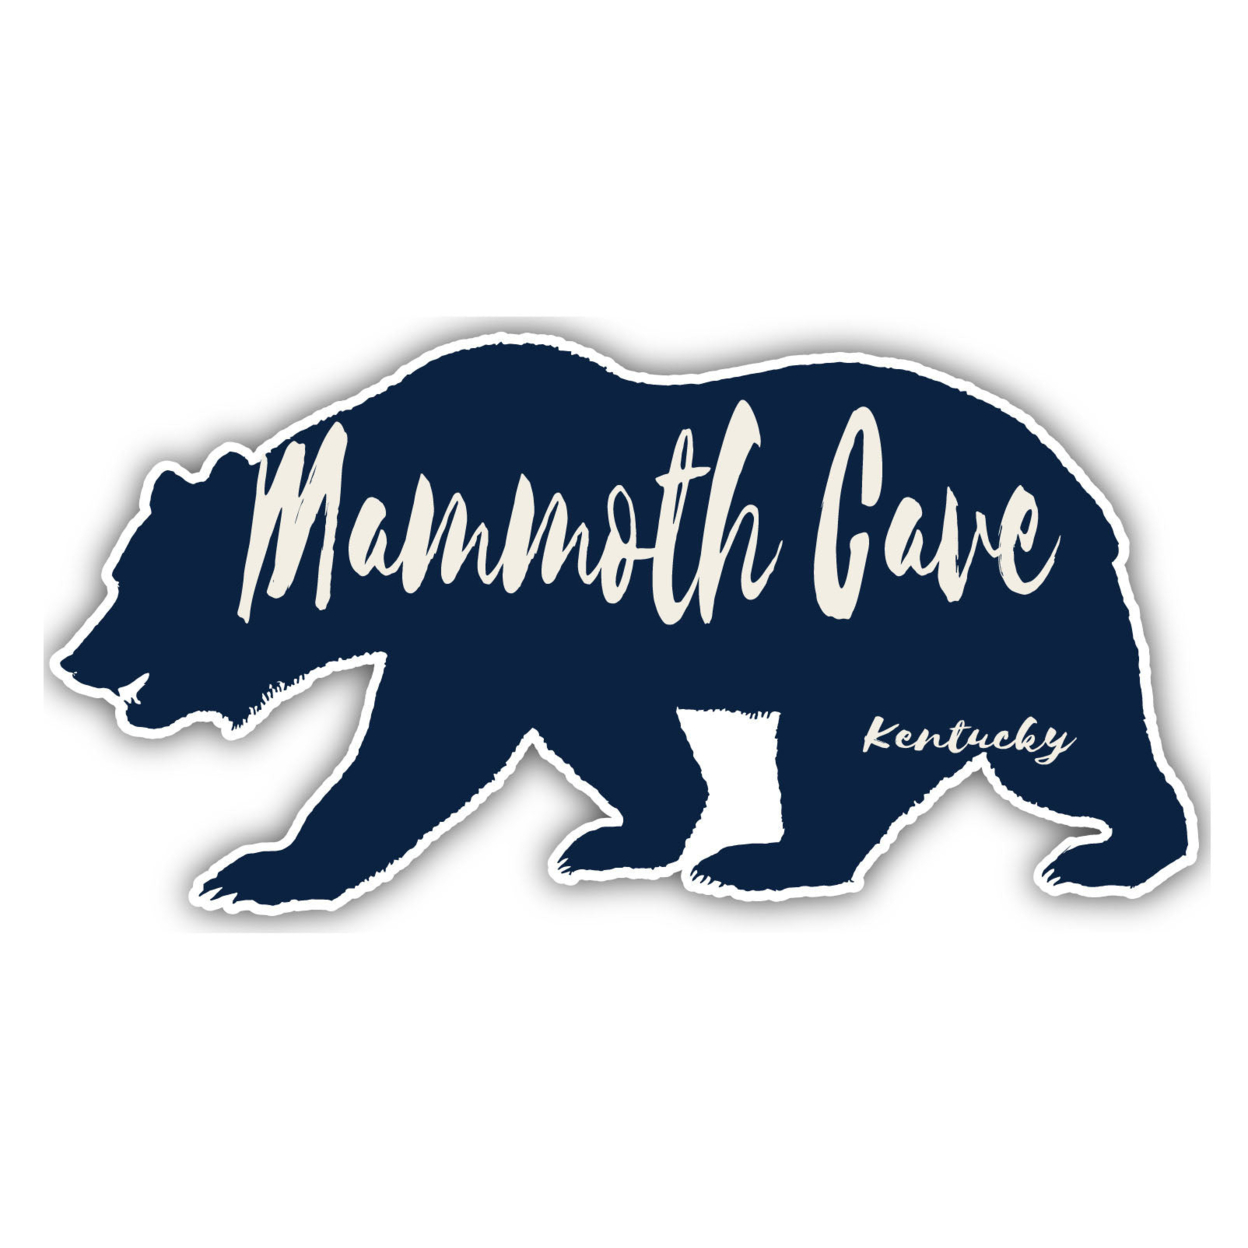 Mammoth Cave Kentucky Souvenir Decorative Stickers (Choose Theme And Size) - 2-Inch, Tent